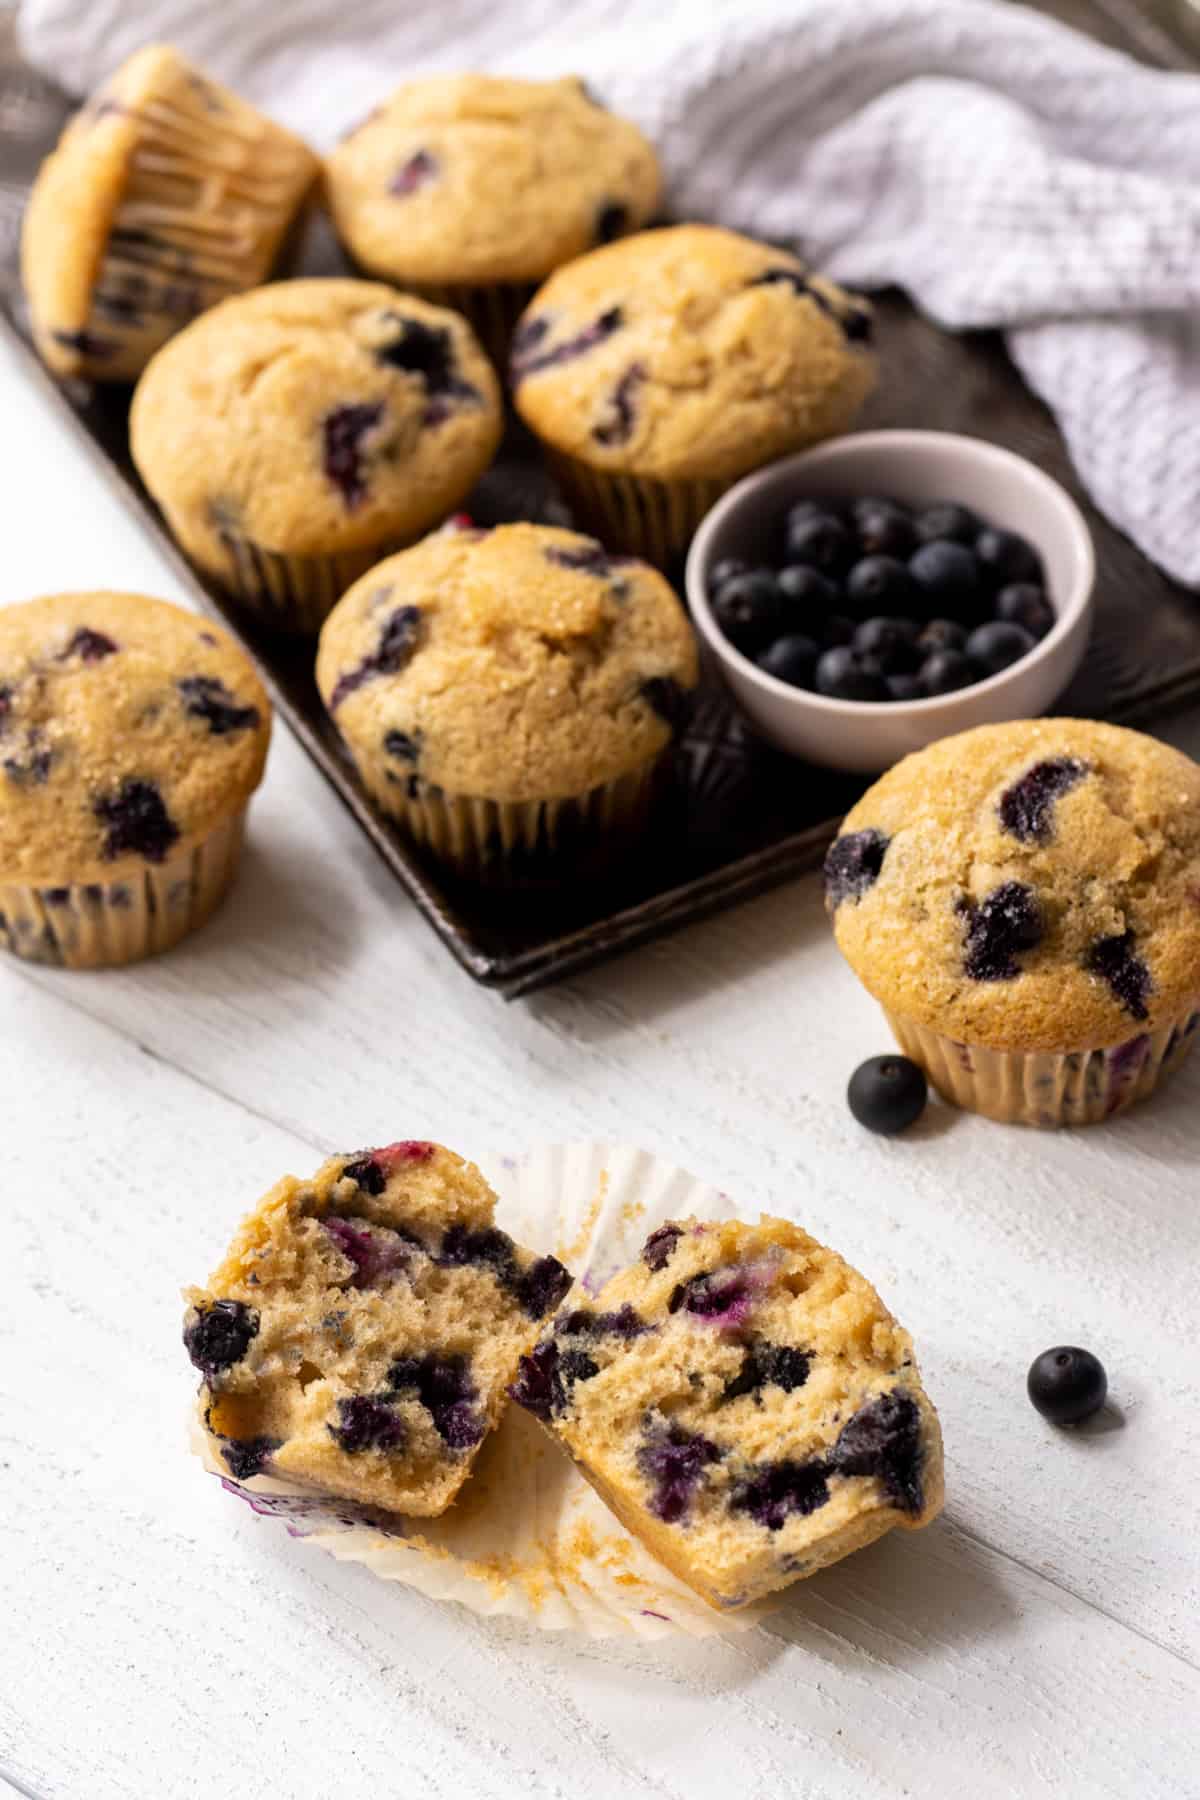 Blueberry buttermilk muffins on a cookie sheet with a bowl of fresh blueberries and more muffins on the table with one in half.